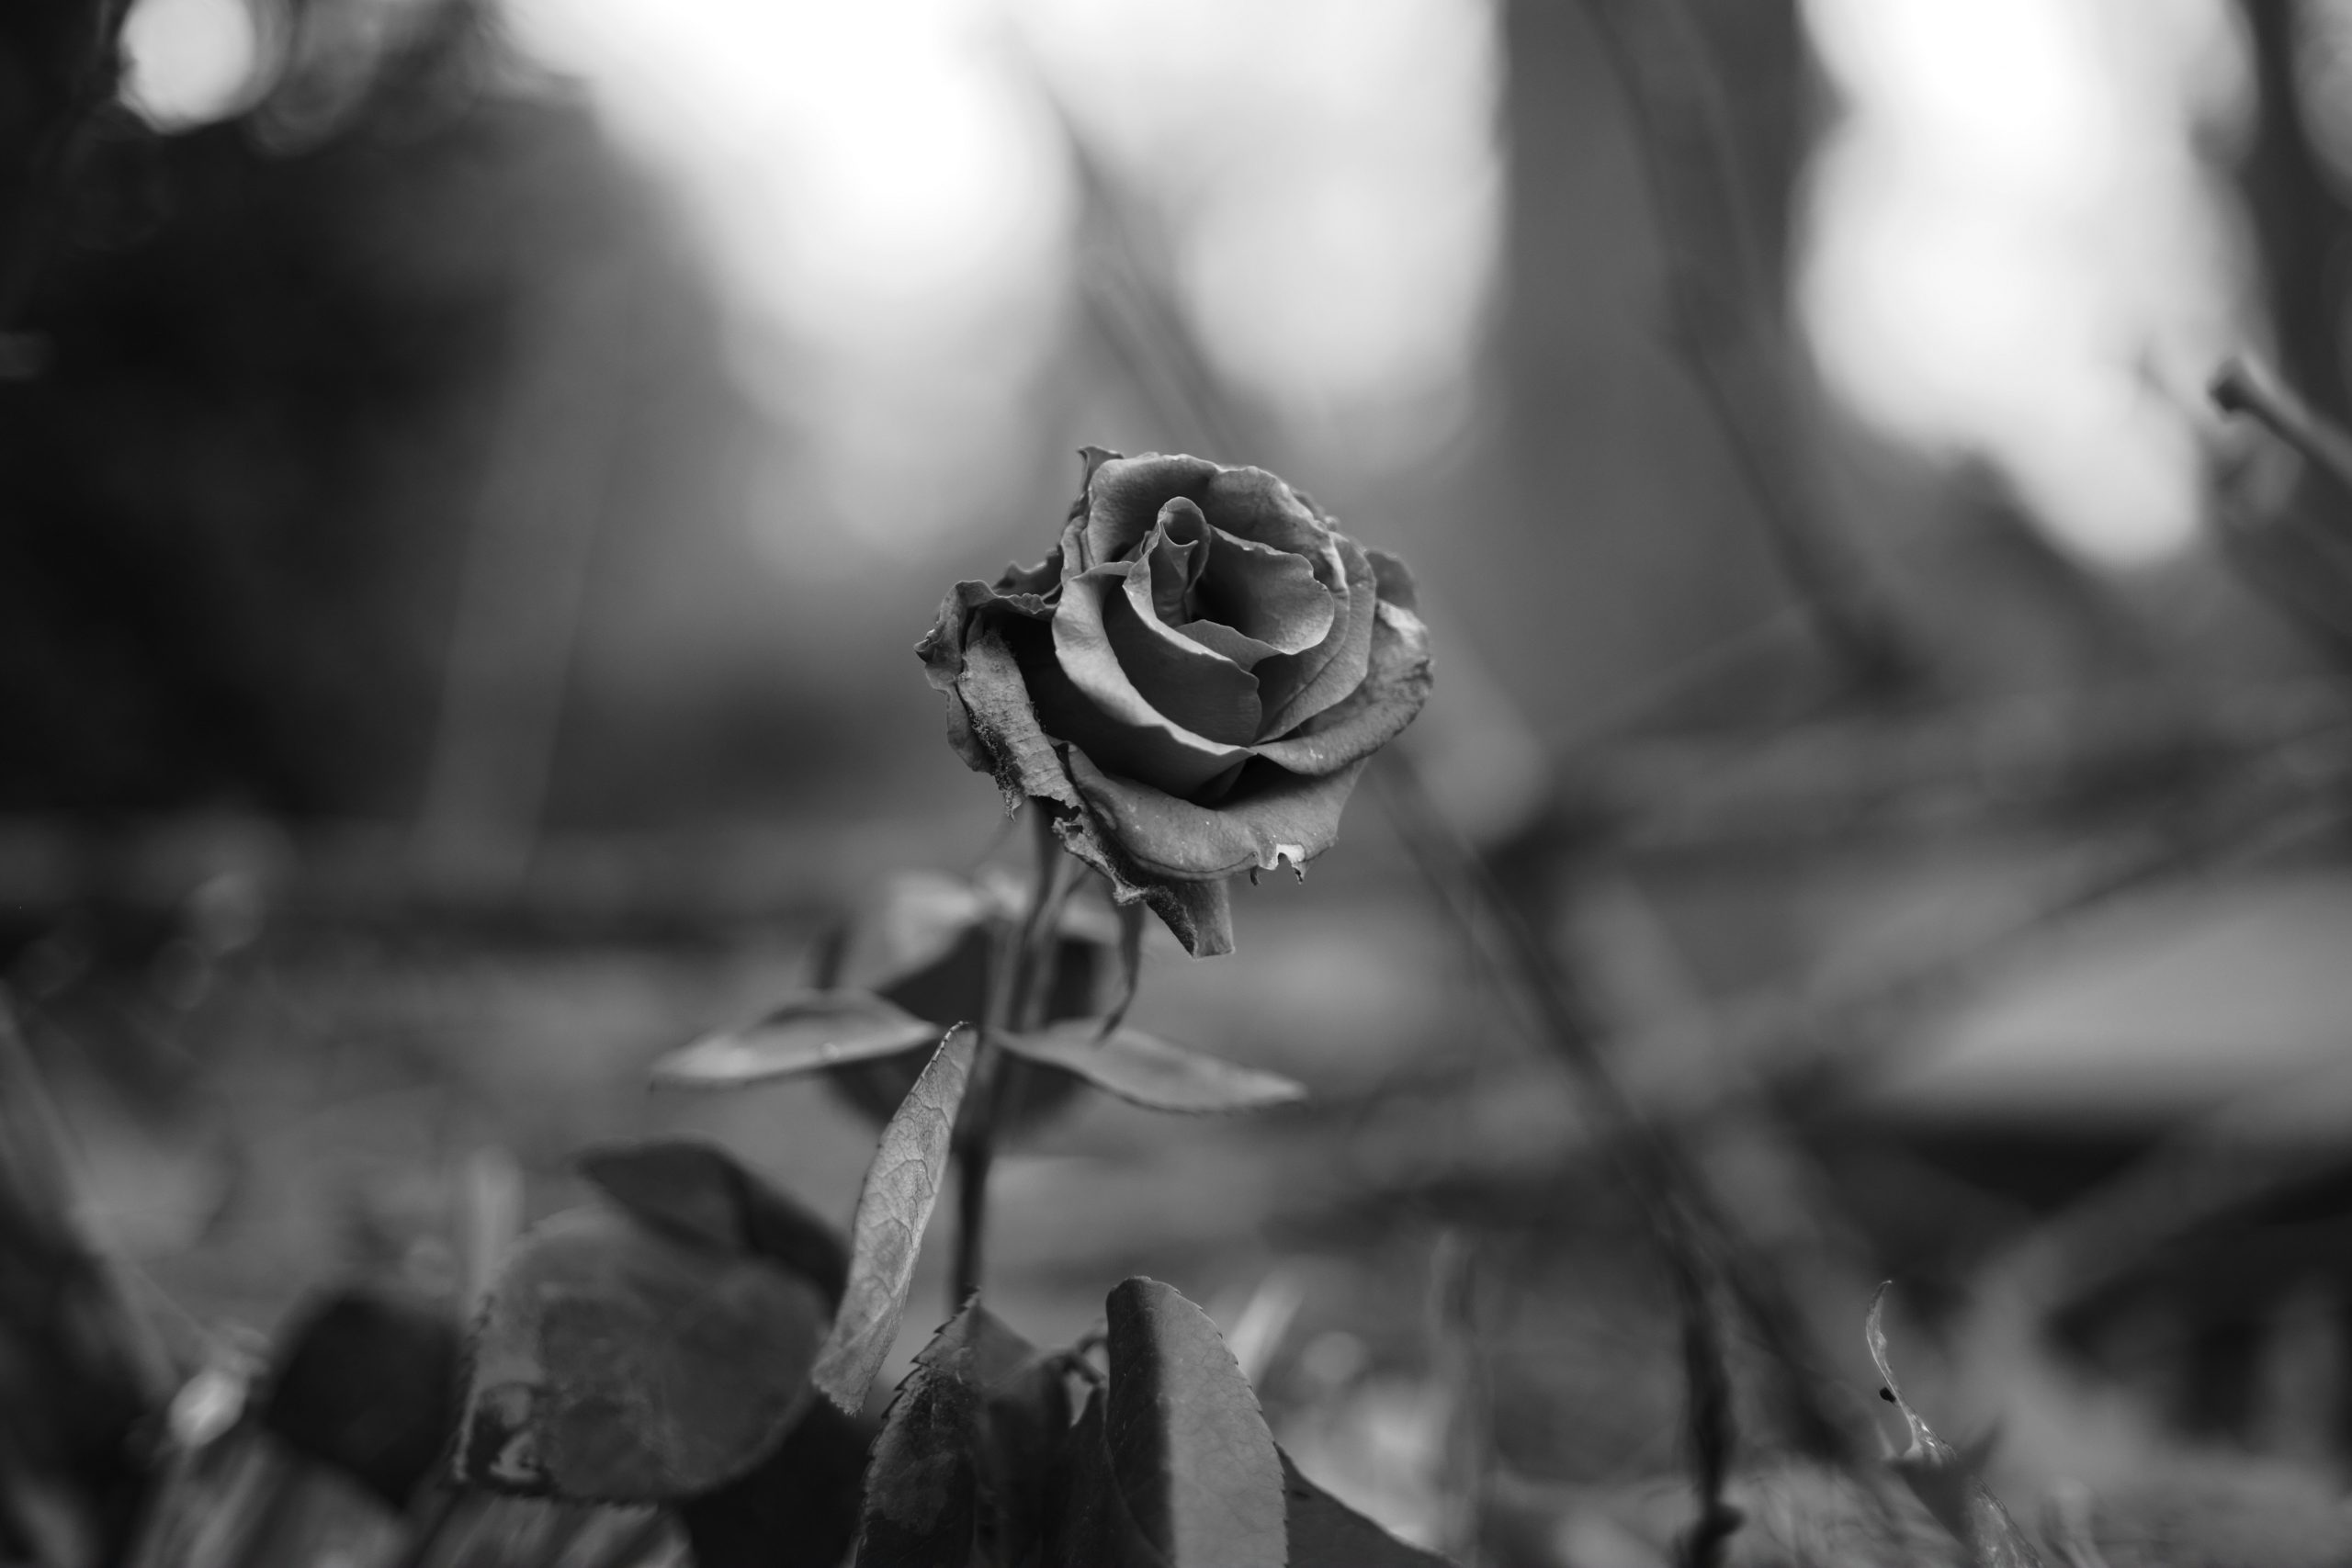 A rose I found in a trashcan, it's still good. The background is blurry and the rose is sharp